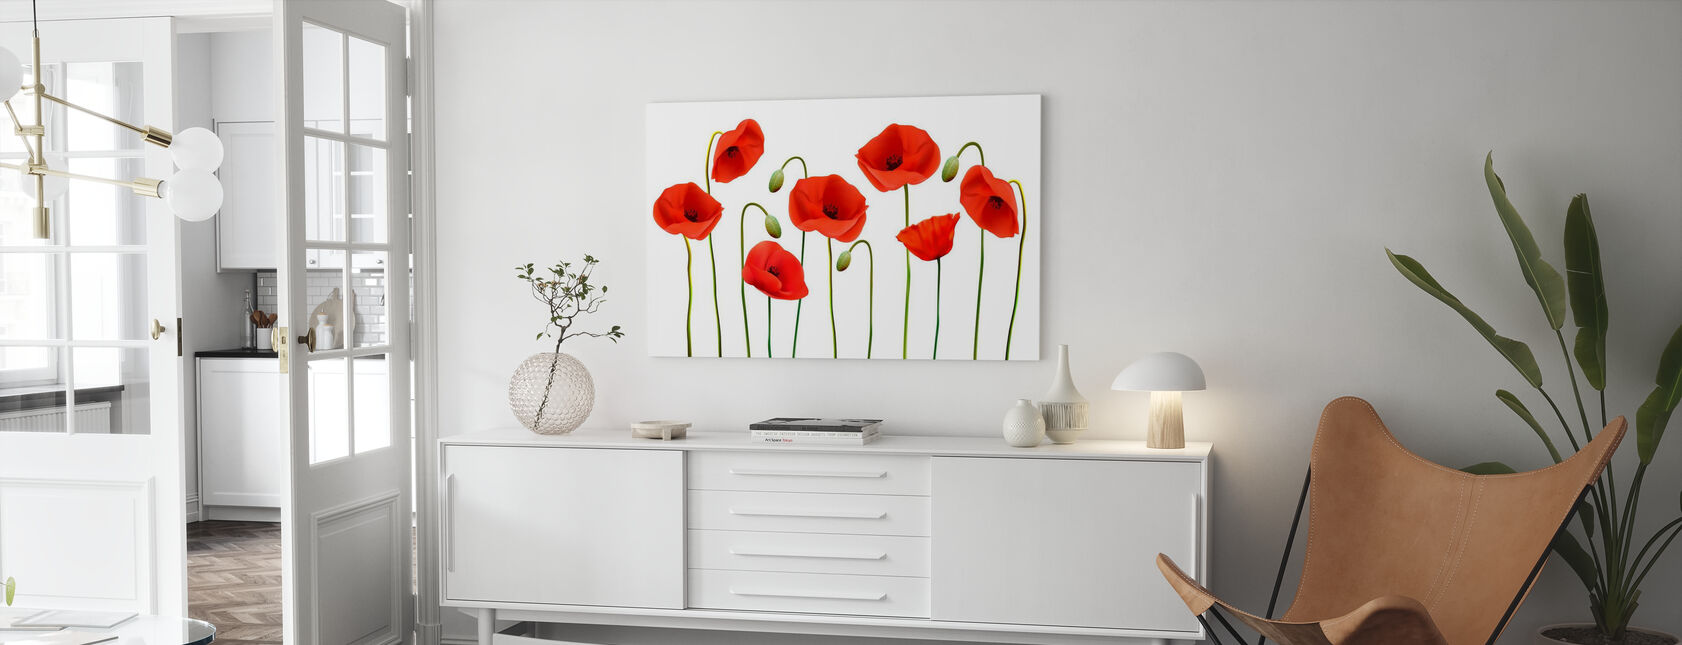 Red Poppies - Canvas print - Living Room